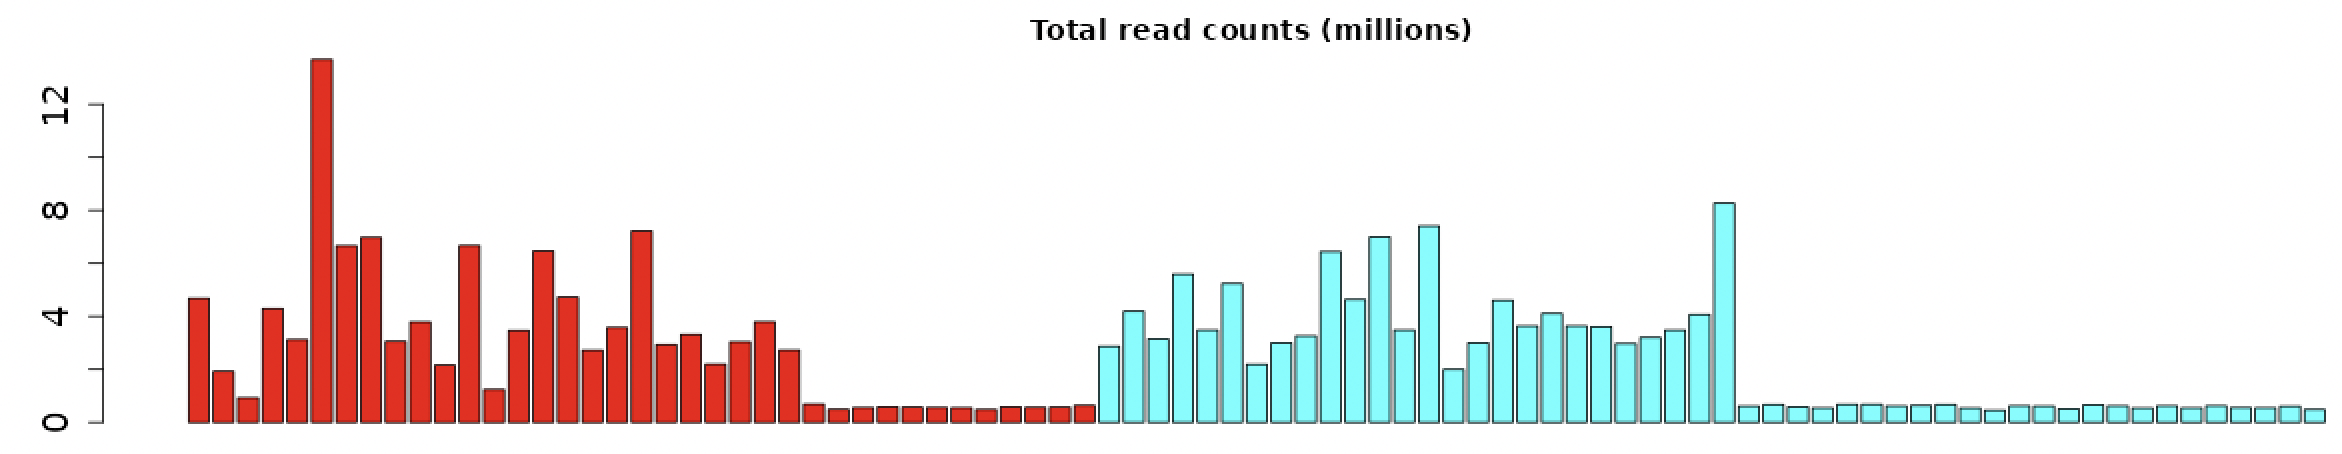 As from you see in the image, the image shown the total read count of the data batch 2 (high read count in both red and blue color) and batch 1 (low read count in both red and blue color). Red color represented control sample and blue color represented the treatment.